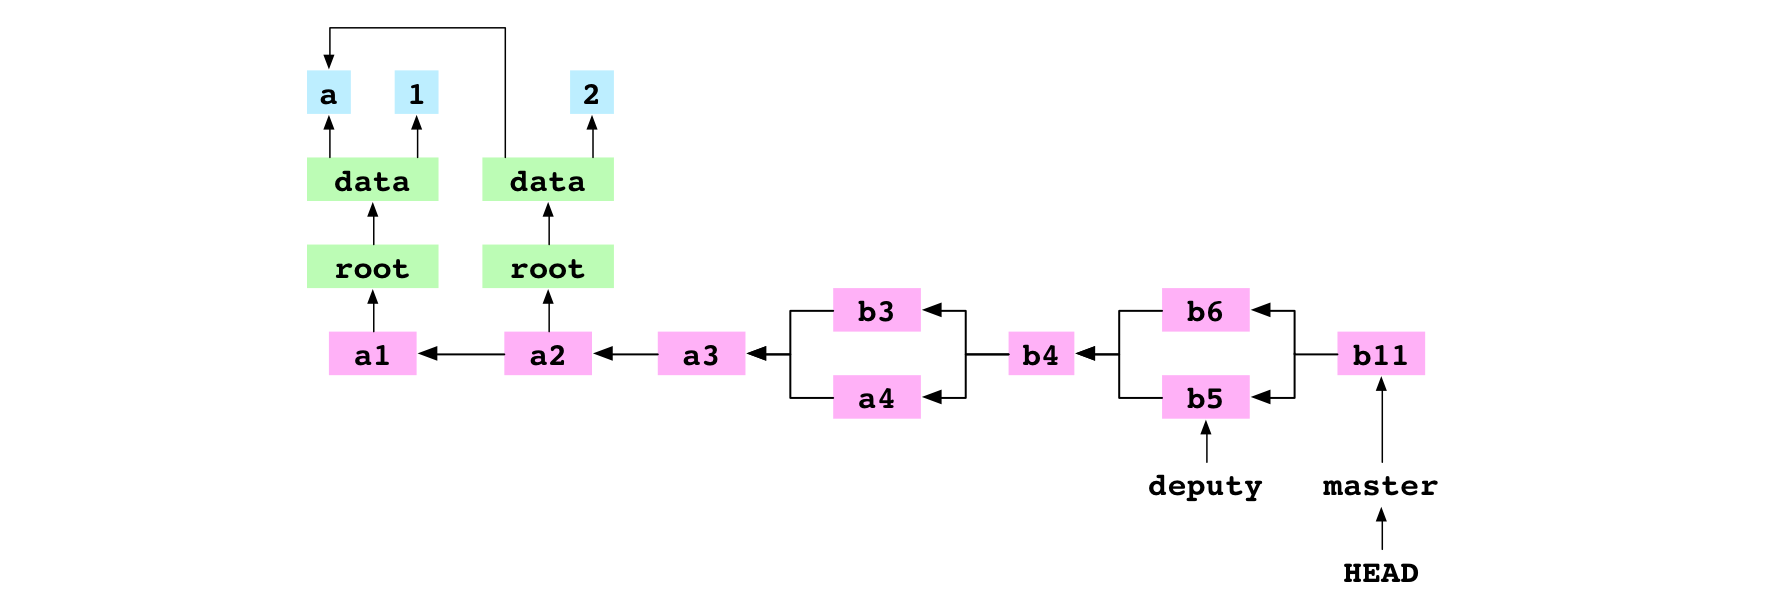 `b11`, the merge commit resulting from the conflicted, recursive merge of `b5` into `b6`